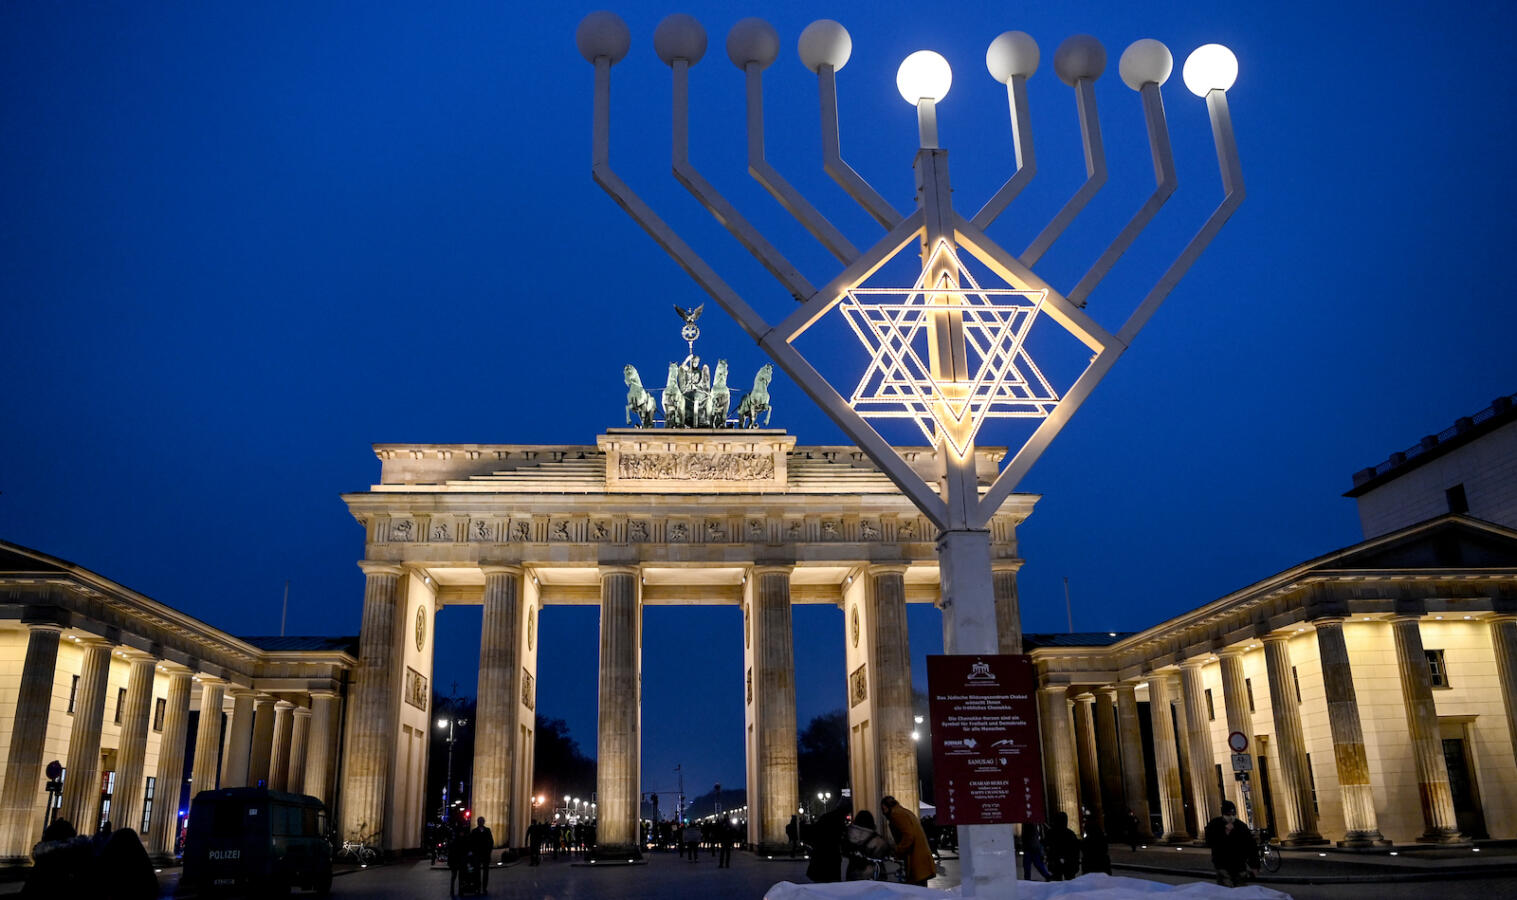 Two lights and the star shine on the Hanukkah chandelier in front of the illuminated Brandenburg Gate.